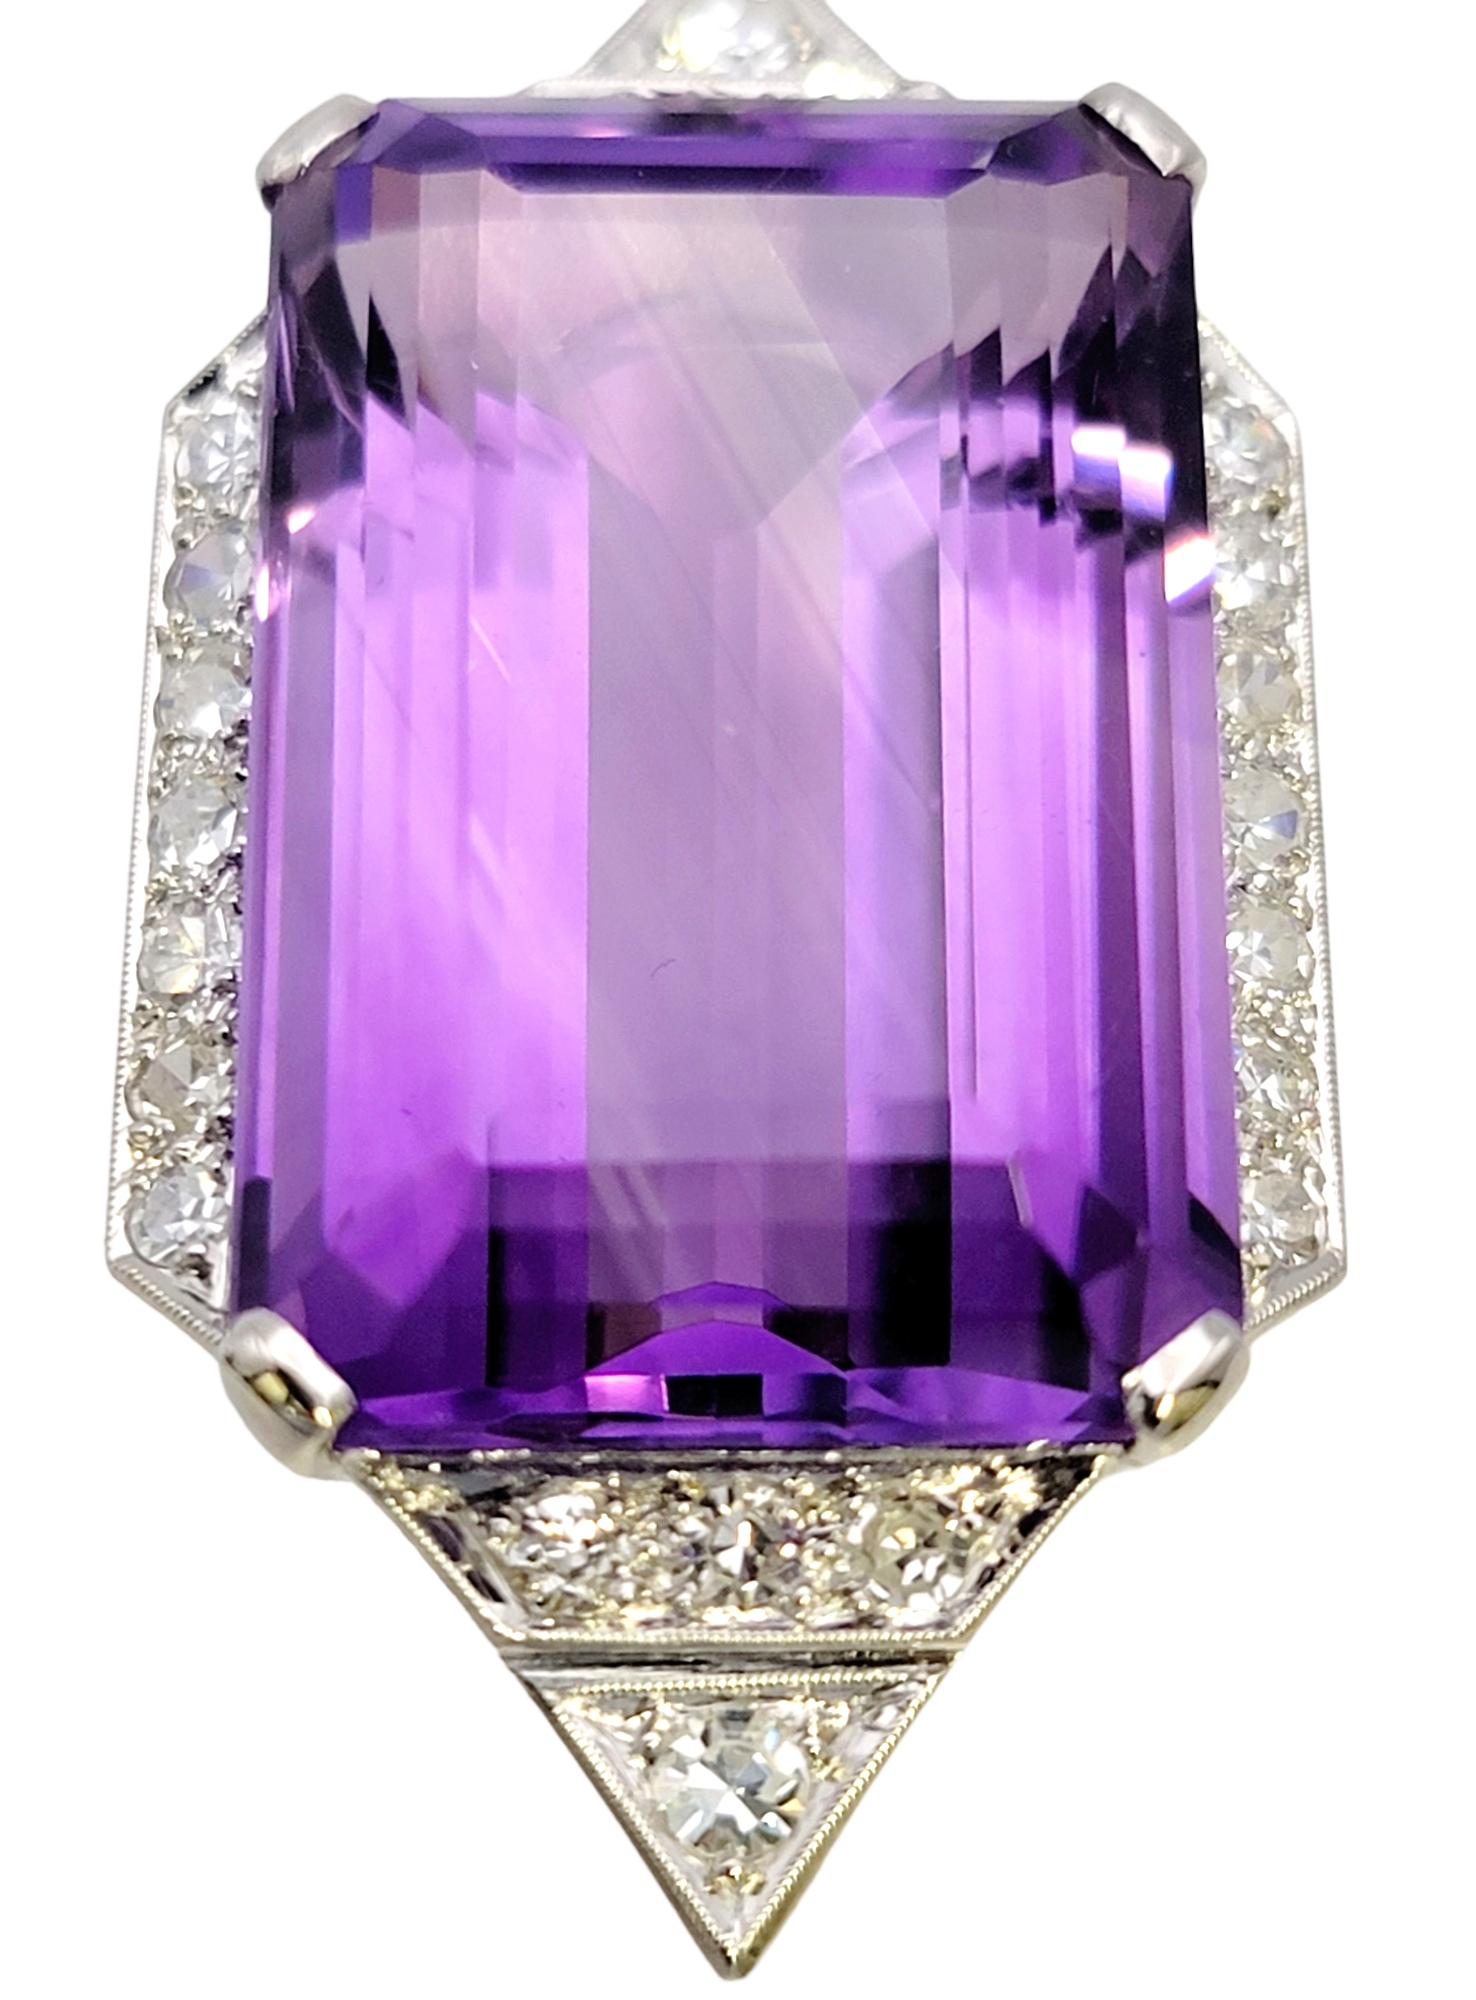 Elevate your jewelry collection with this breathtaking vintage lady's pendant featuring a magnificent large emerald-cut amethyst and dazzling diamonds. Crafted in lustrous platinum, this exquisite piece exudes timeless beauty and sophistication.